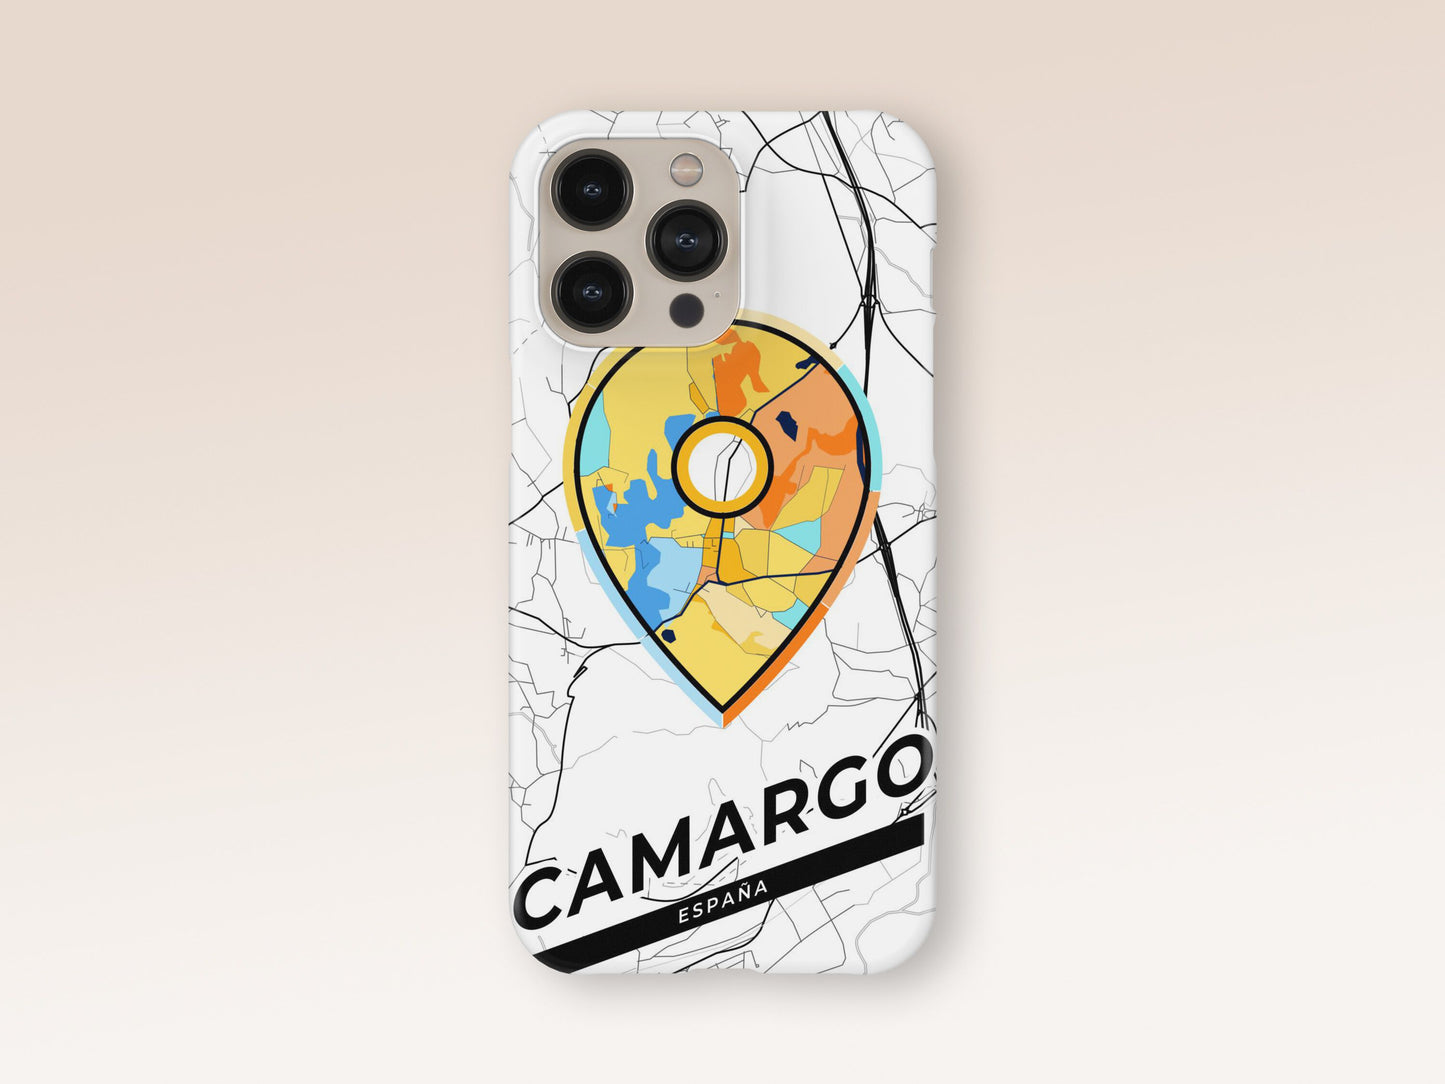 Camargo Spain slim phone case with colorful icon. Birthday, wedding or housewarming gift. Couple match cases. 1